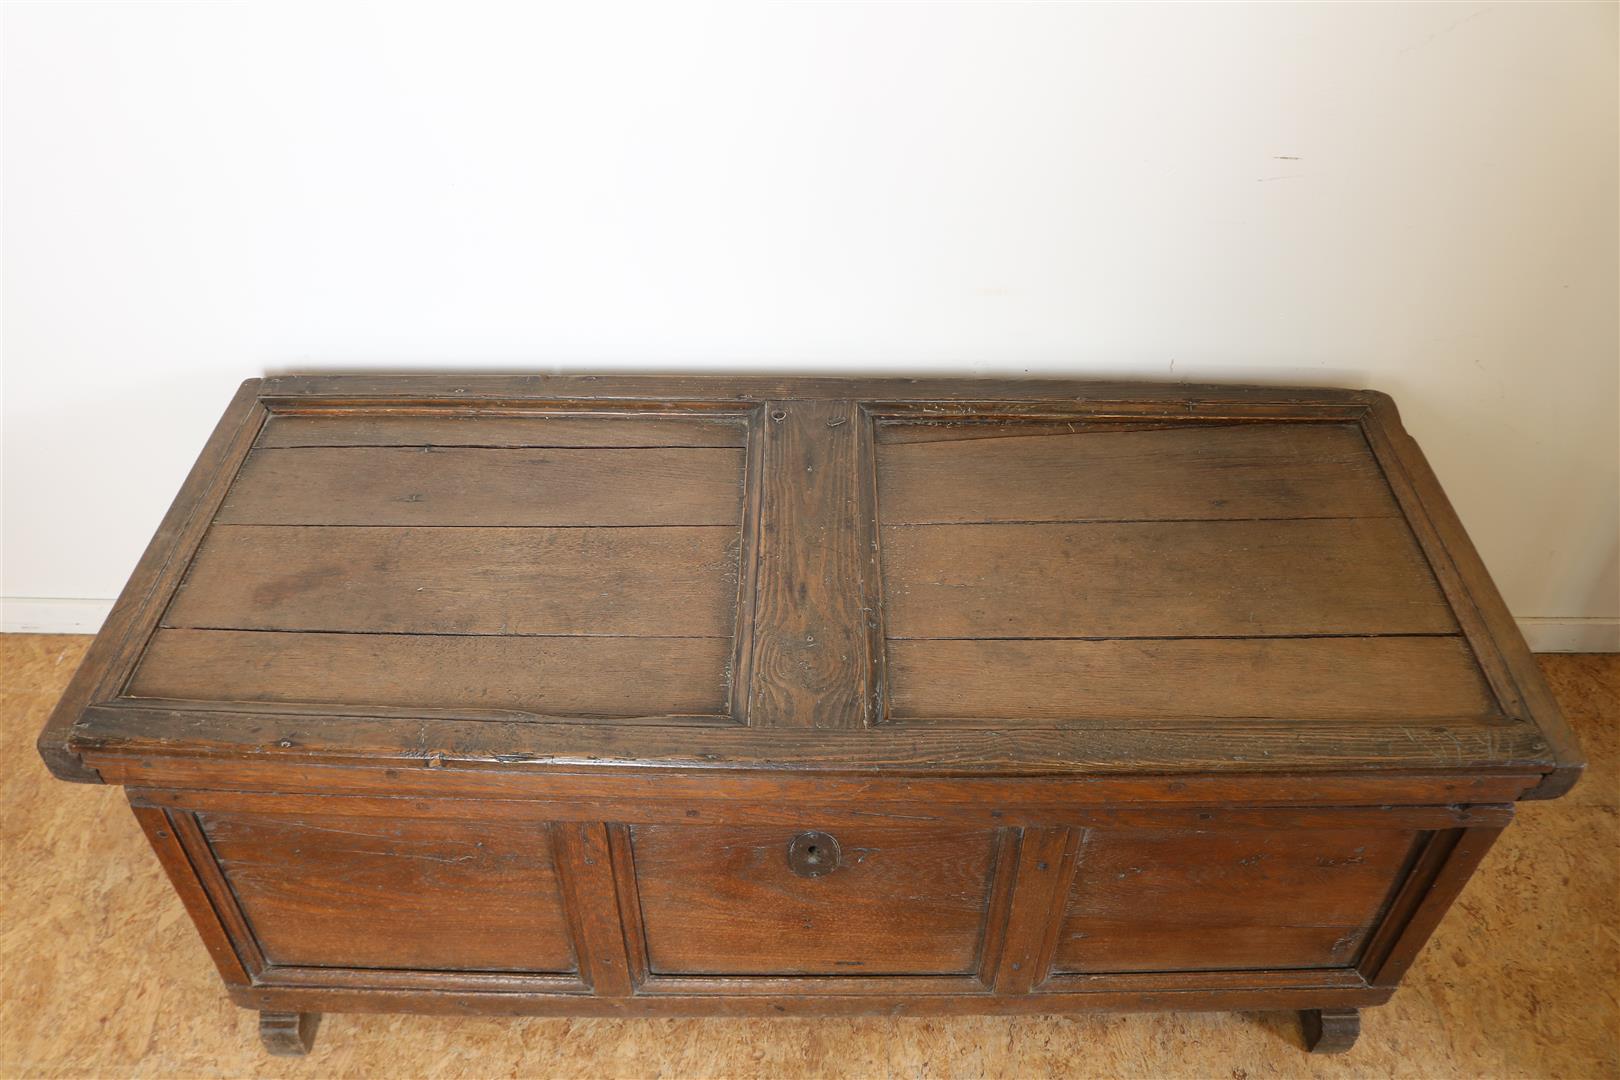 Oak blanket chest with 3 front panels, resting cap, struts, 18th century, 47 x 128 x 55 cm. - Image 4 of 4